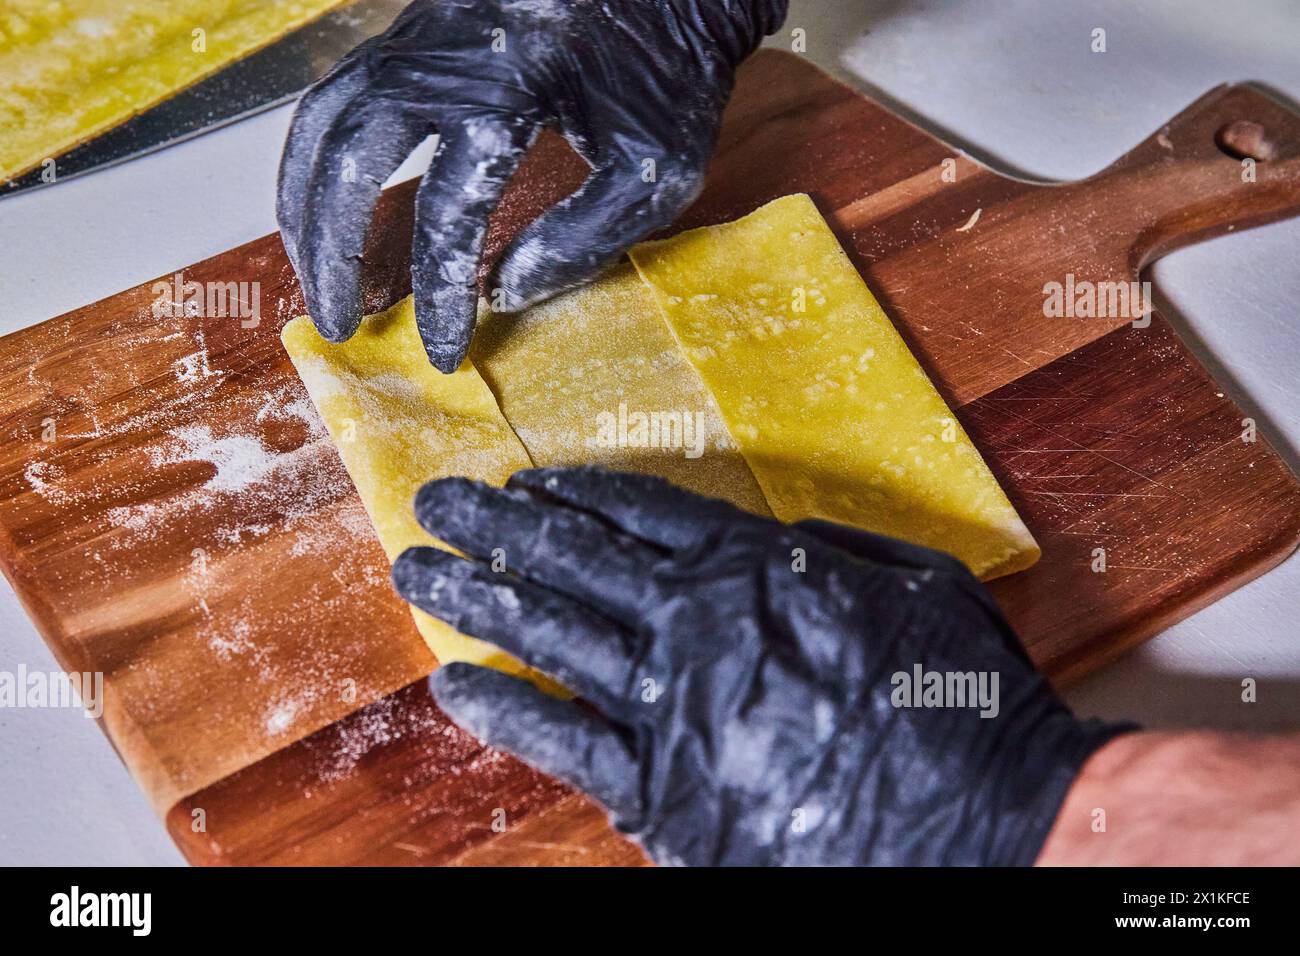 Artisan Pasta Making with Hygienic Gloves, Close-Up Perspective Stock Photo